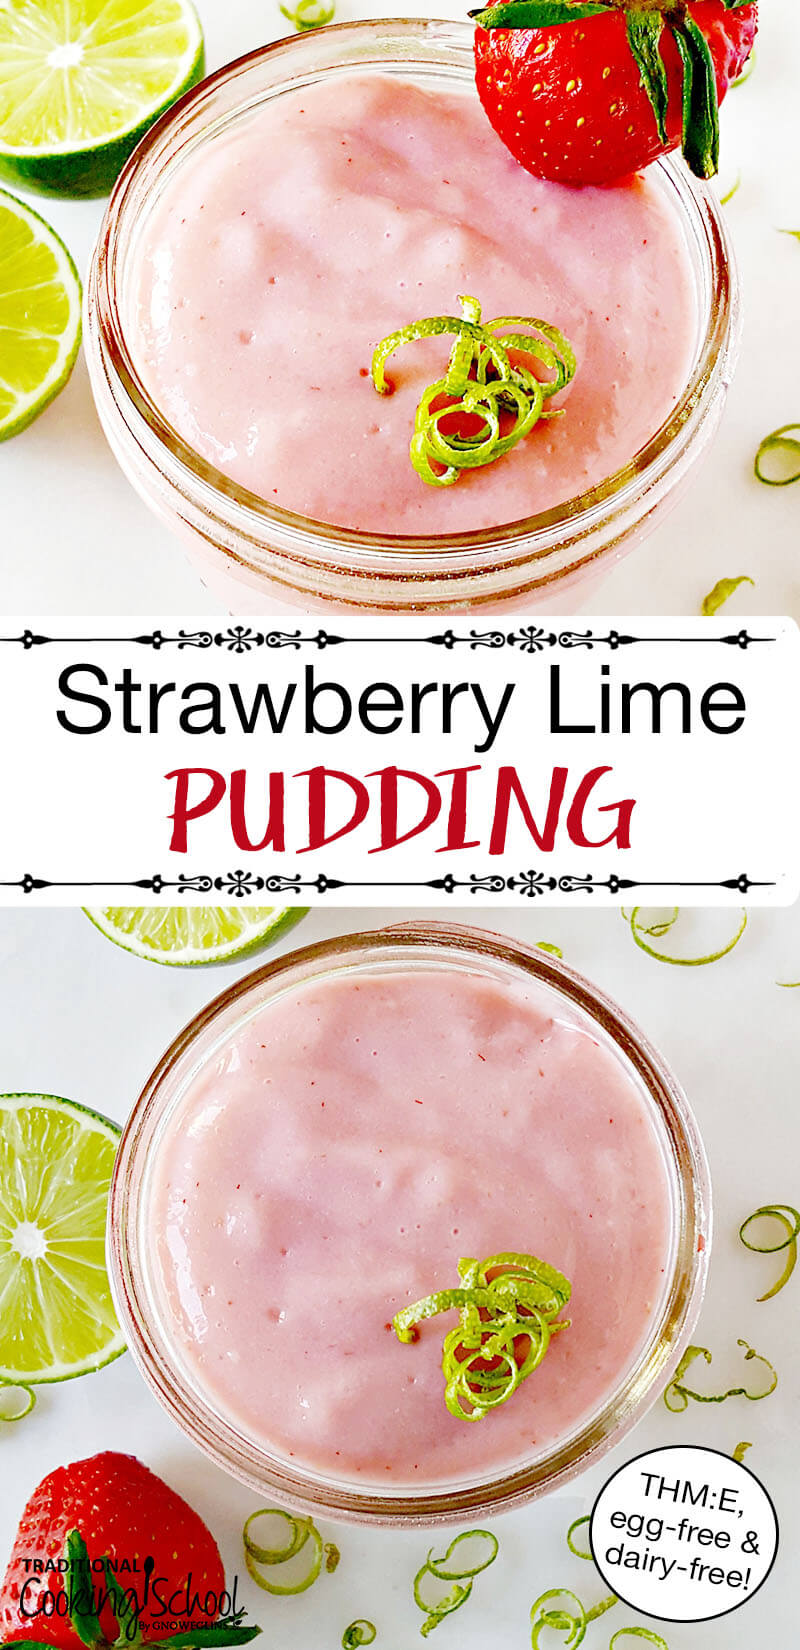 THM:E Strawberry Lime Pudding {egg-free & dairy-free!} | Because Real Food desserts are often full of egg yolks and healthy fats, it is difficult for Trim Healthy Mamas to enjoy scrumptious sweets after their E (Energizing) meals. Look no further than this refreshingly sweet, dairy-free, egg-free pudding! | TraditionalCookingSchool.com